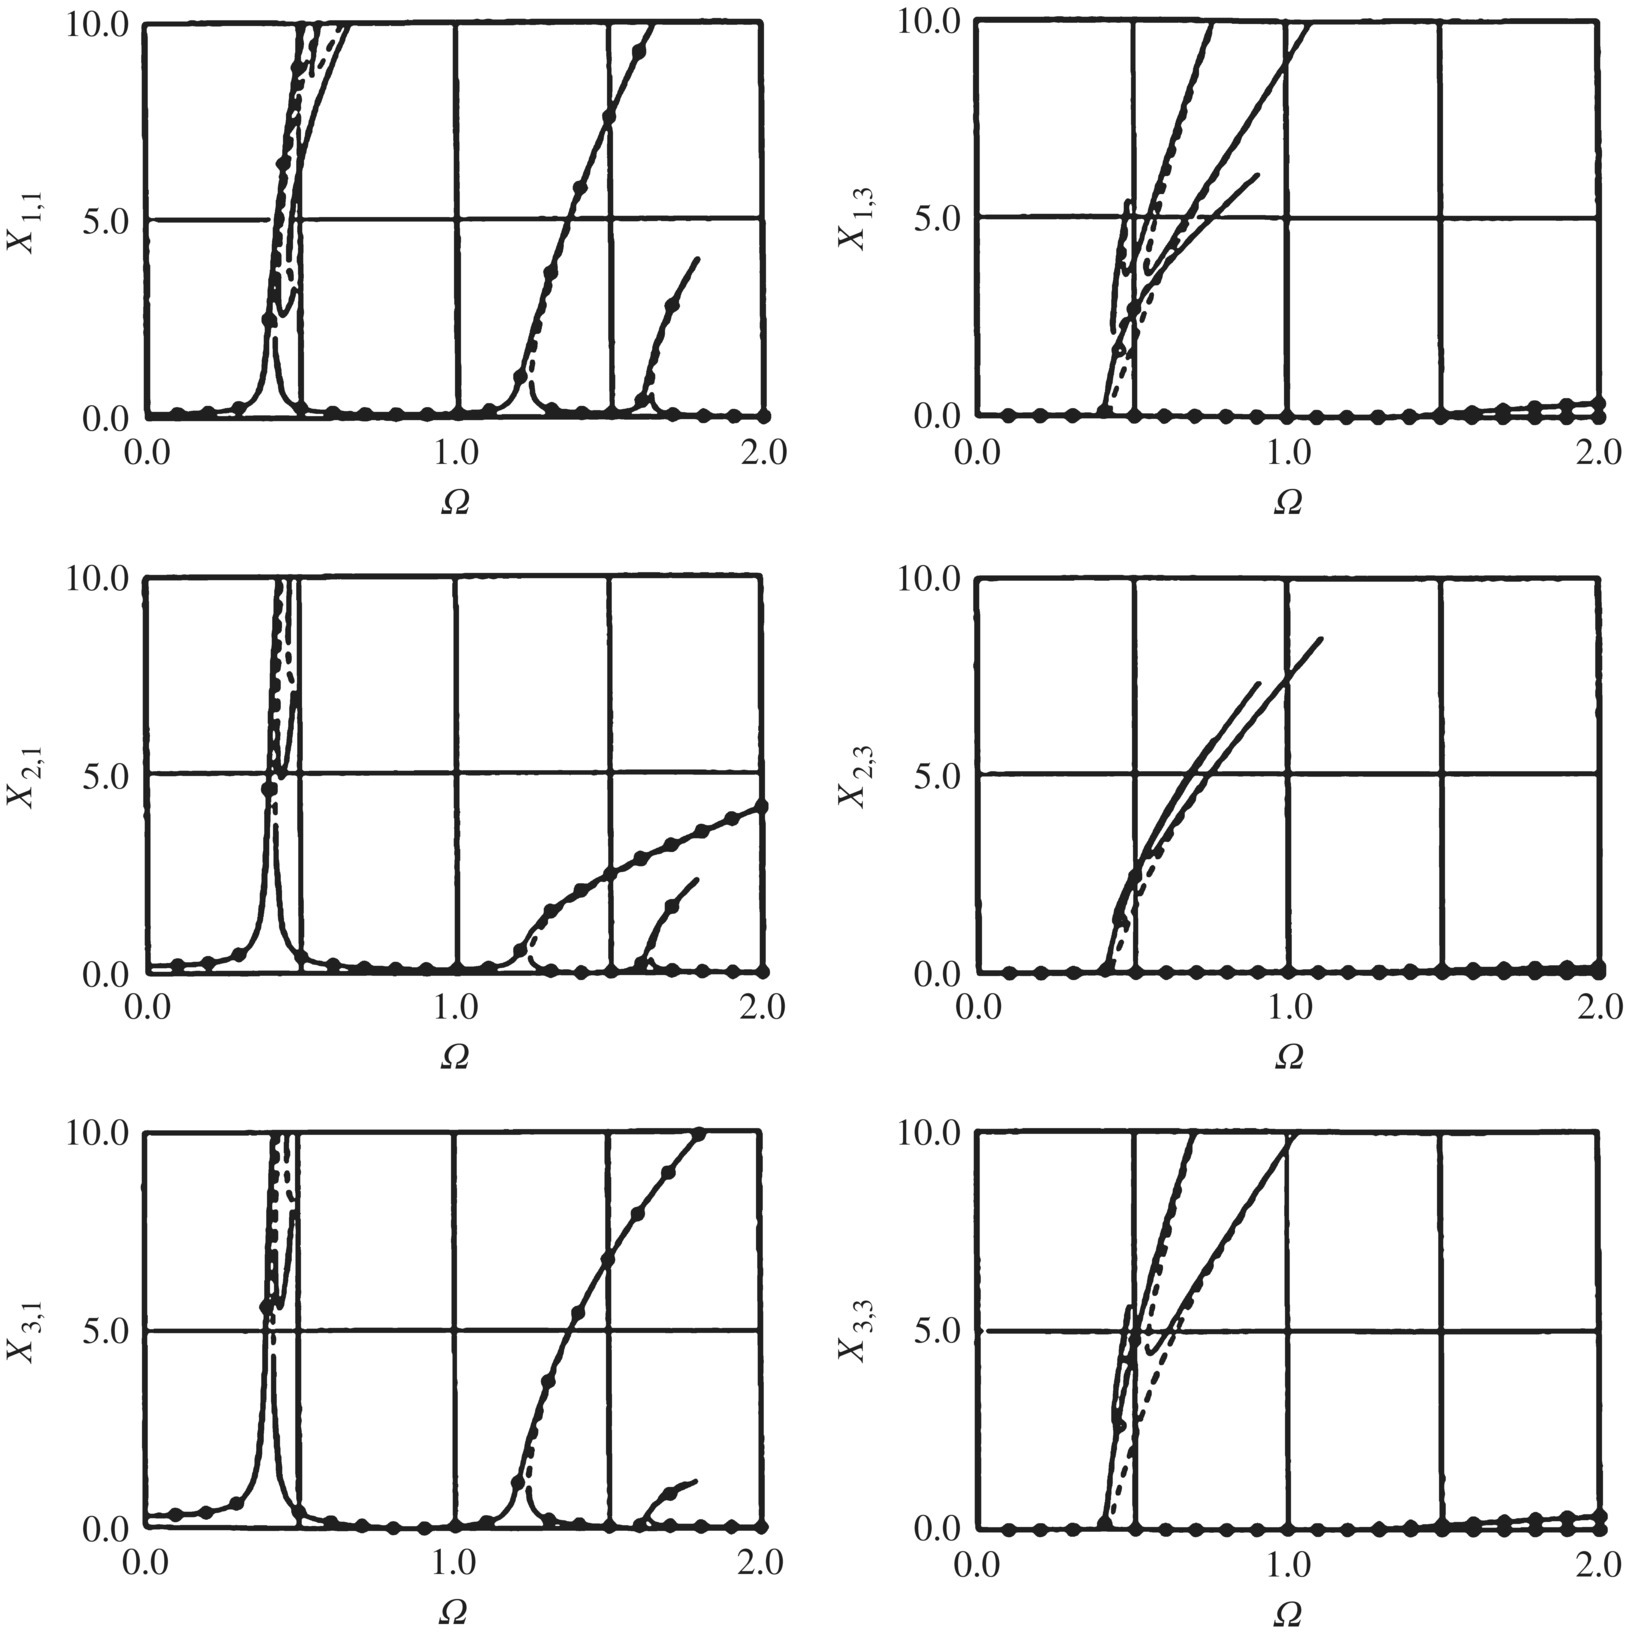 6 Graphs of X1,1 (top left), X1,3 (top right), X2,1 (middle left), X2,3 (middle right), X3,1 (bottom left), and X3,3 (bottom right) vs. Ω, each displaying solid and dashed response curves of harmonic oscillations.